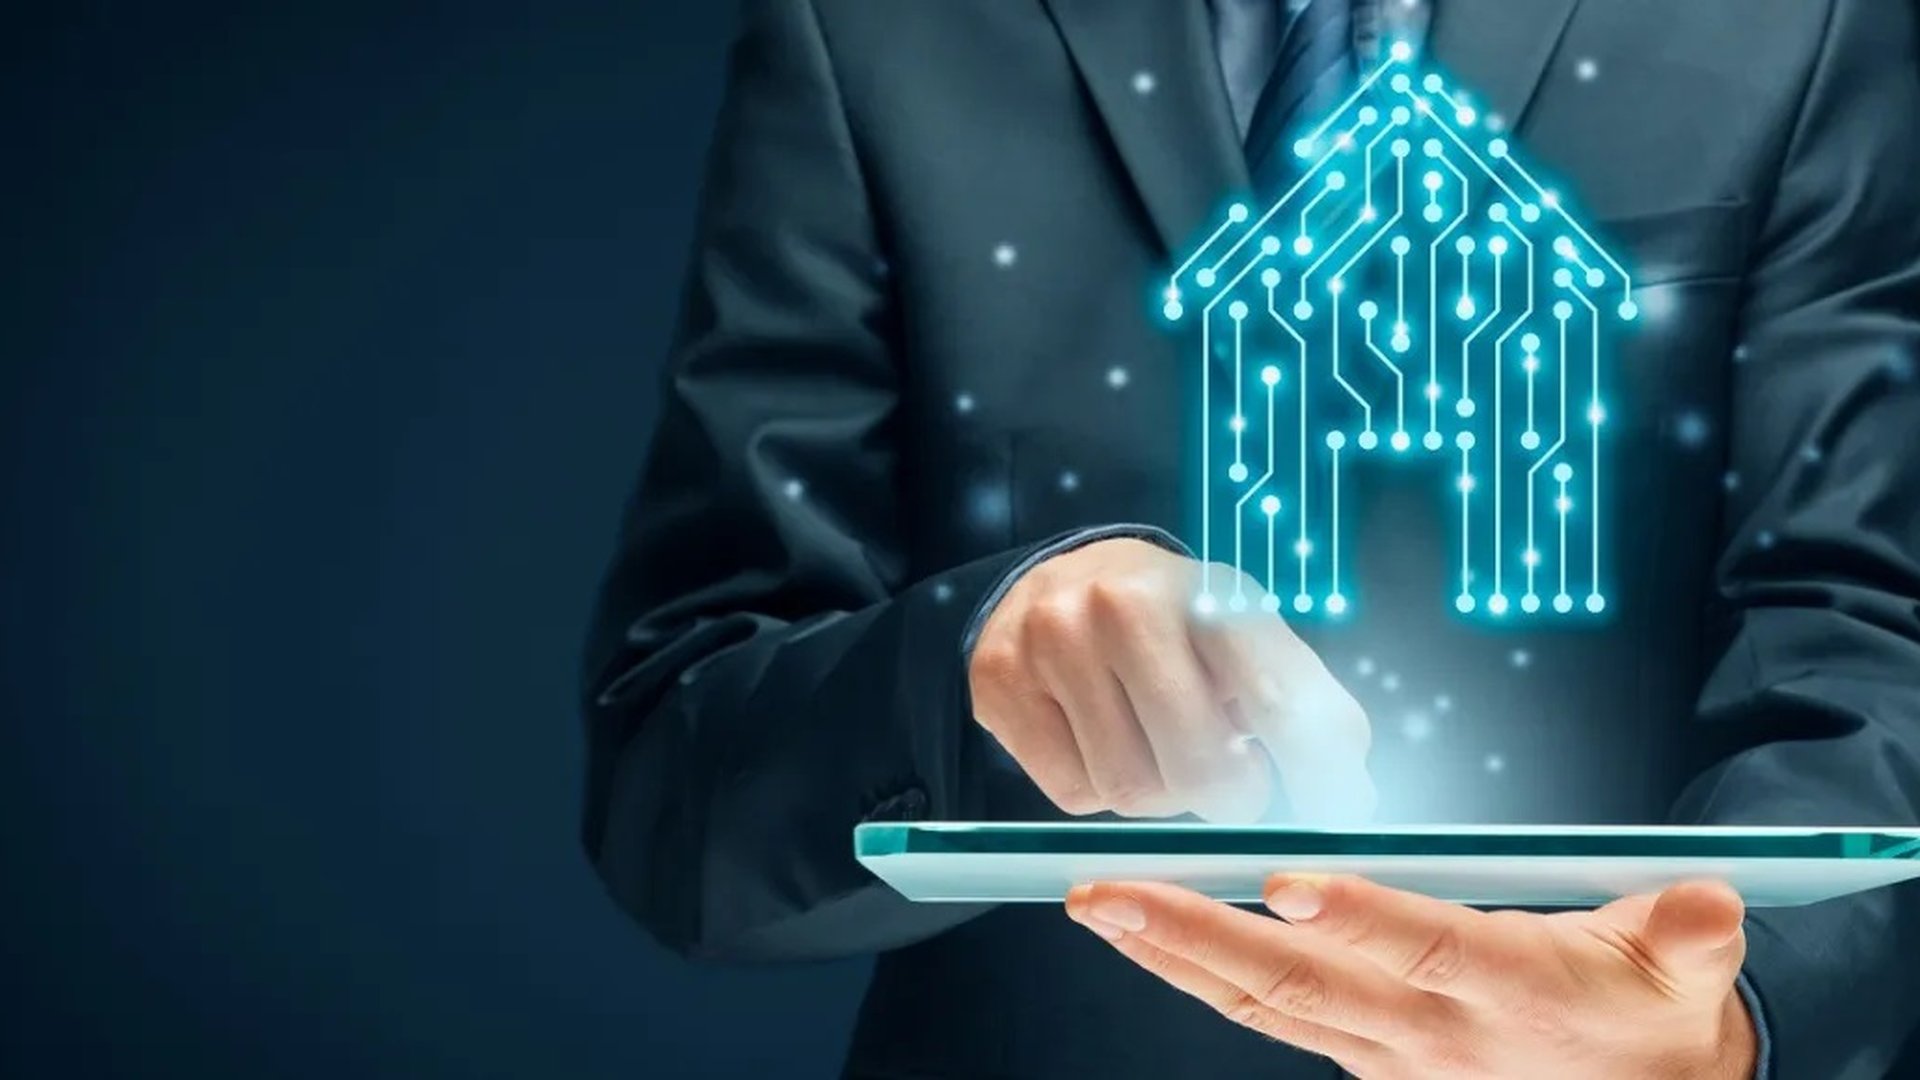 How smart homes are transforming our way of life and real estate